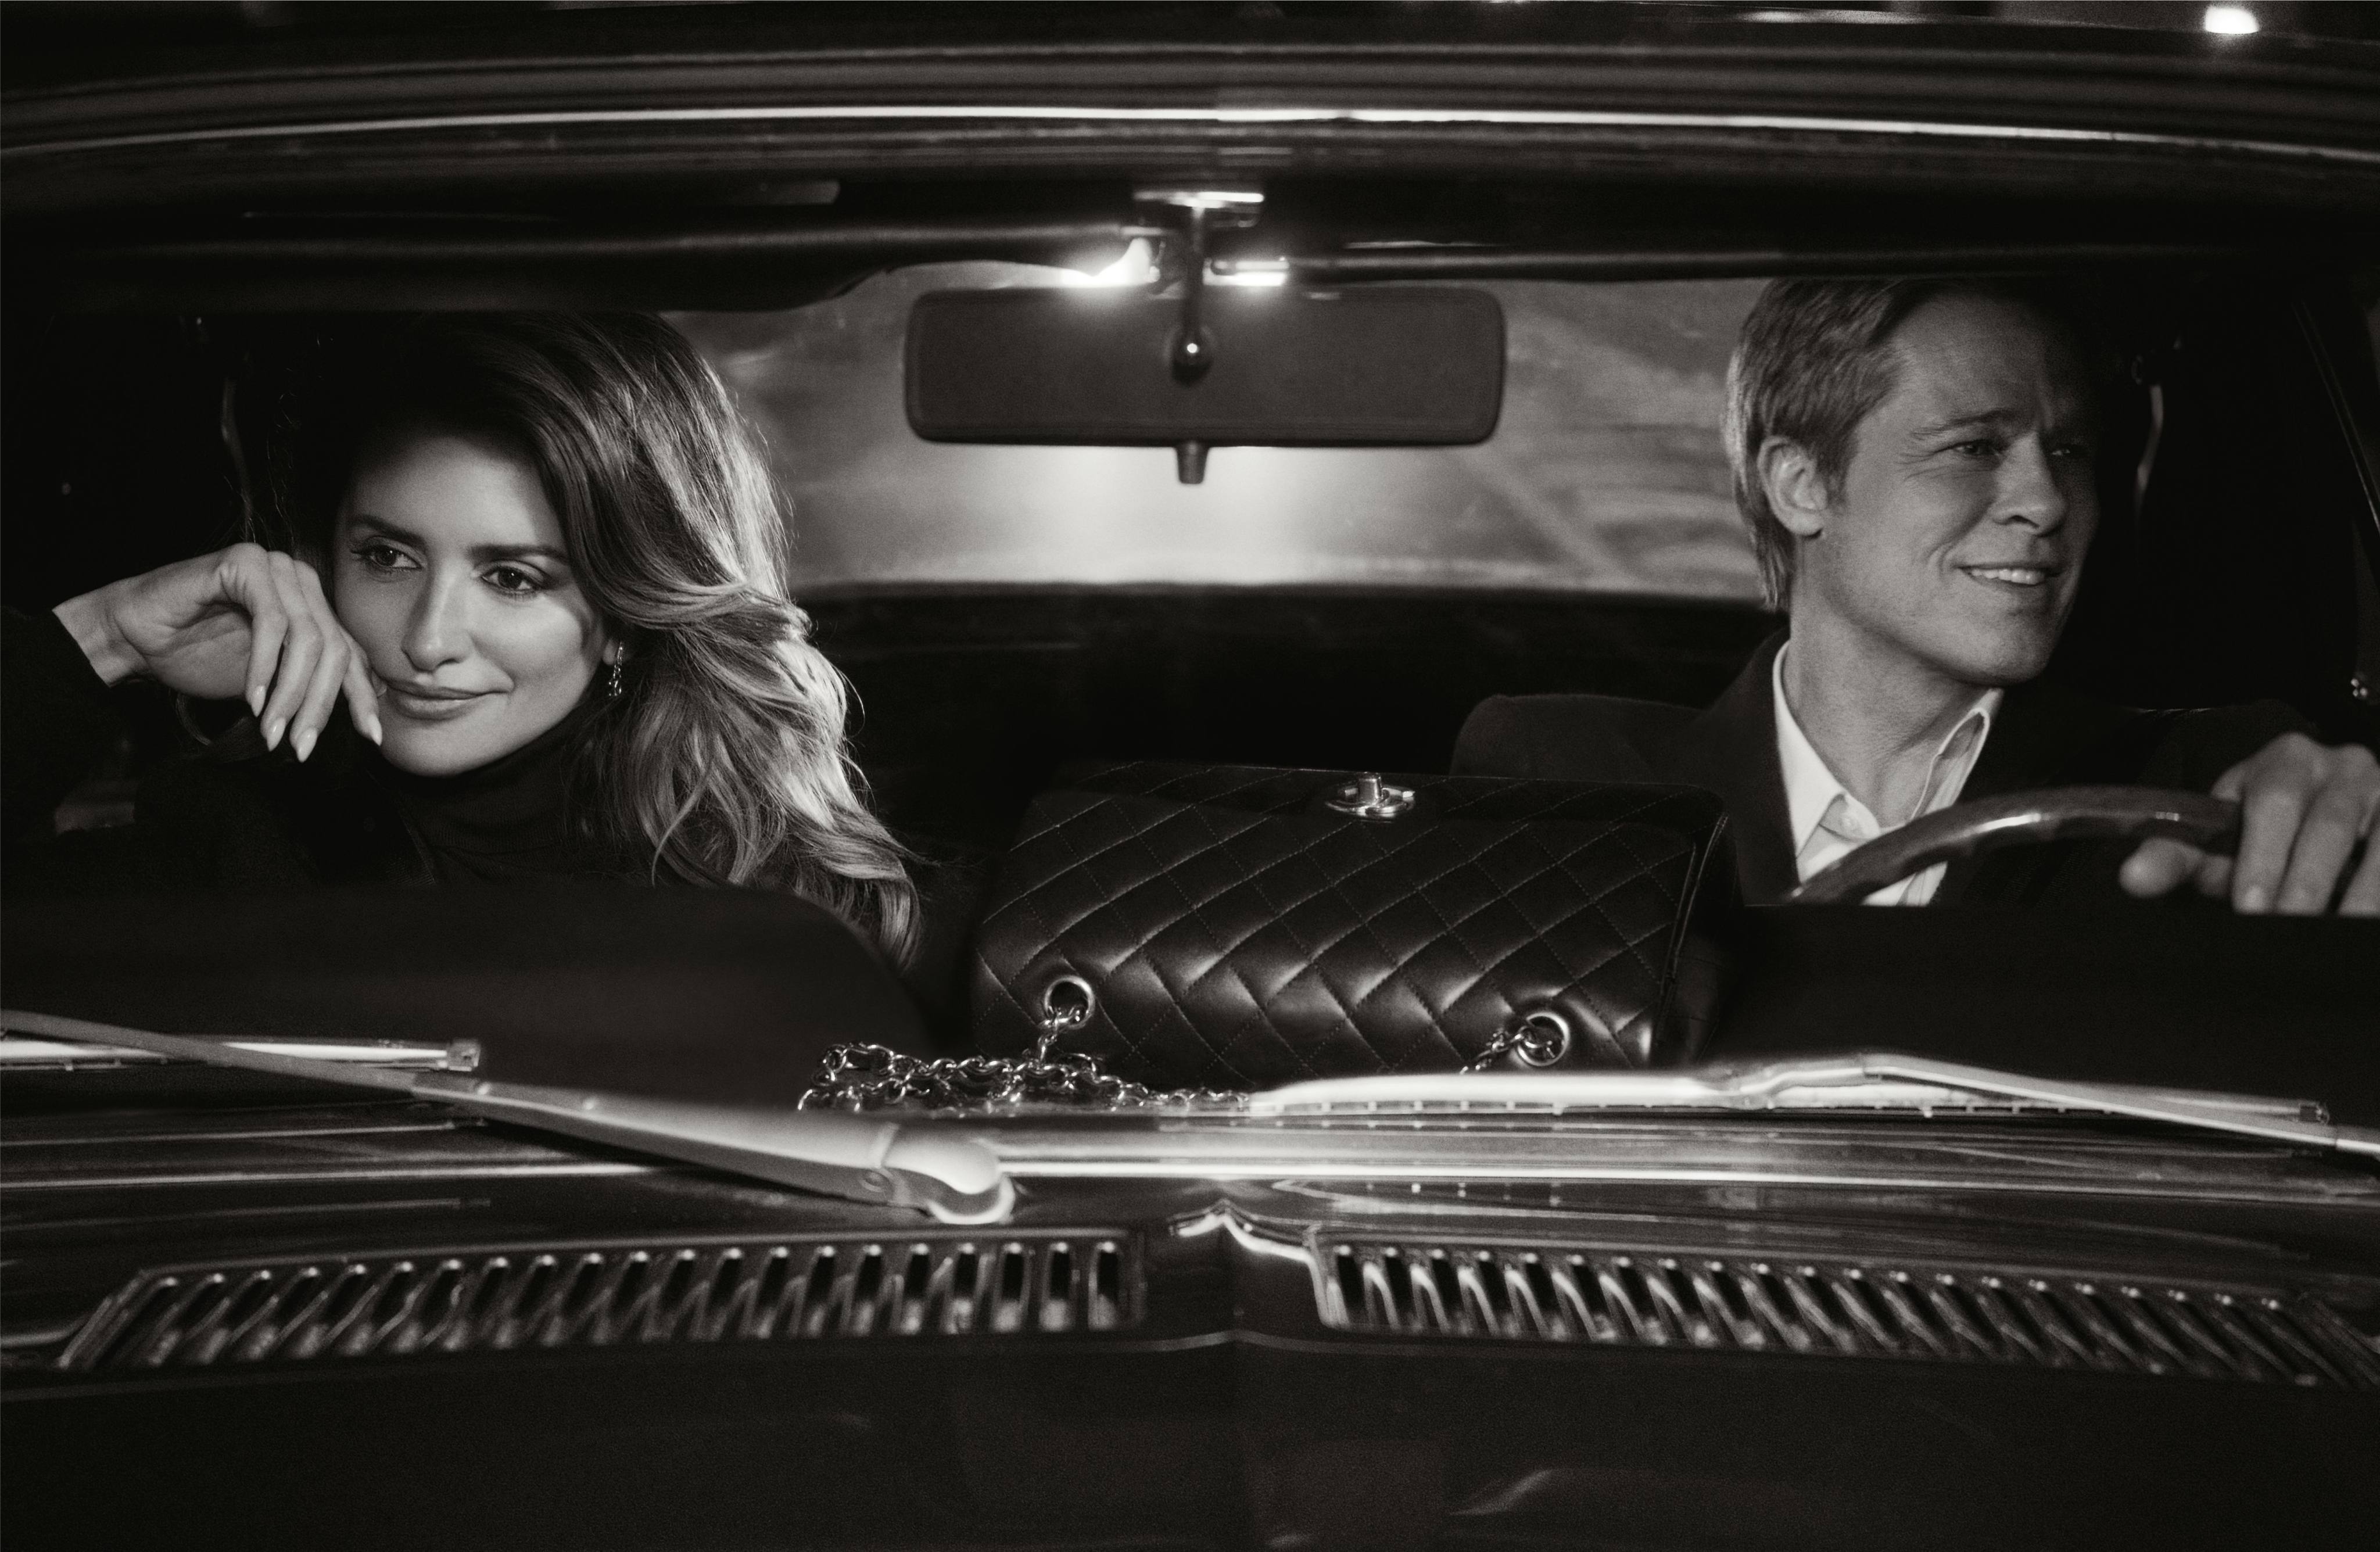 Penélope Cruz and Brad Pitt star in a Chanel campaign devoted to the label’s signature quilted handbag and inspired by the 1966 film A Man and a Woman. Photo: Inez & Vinoodh